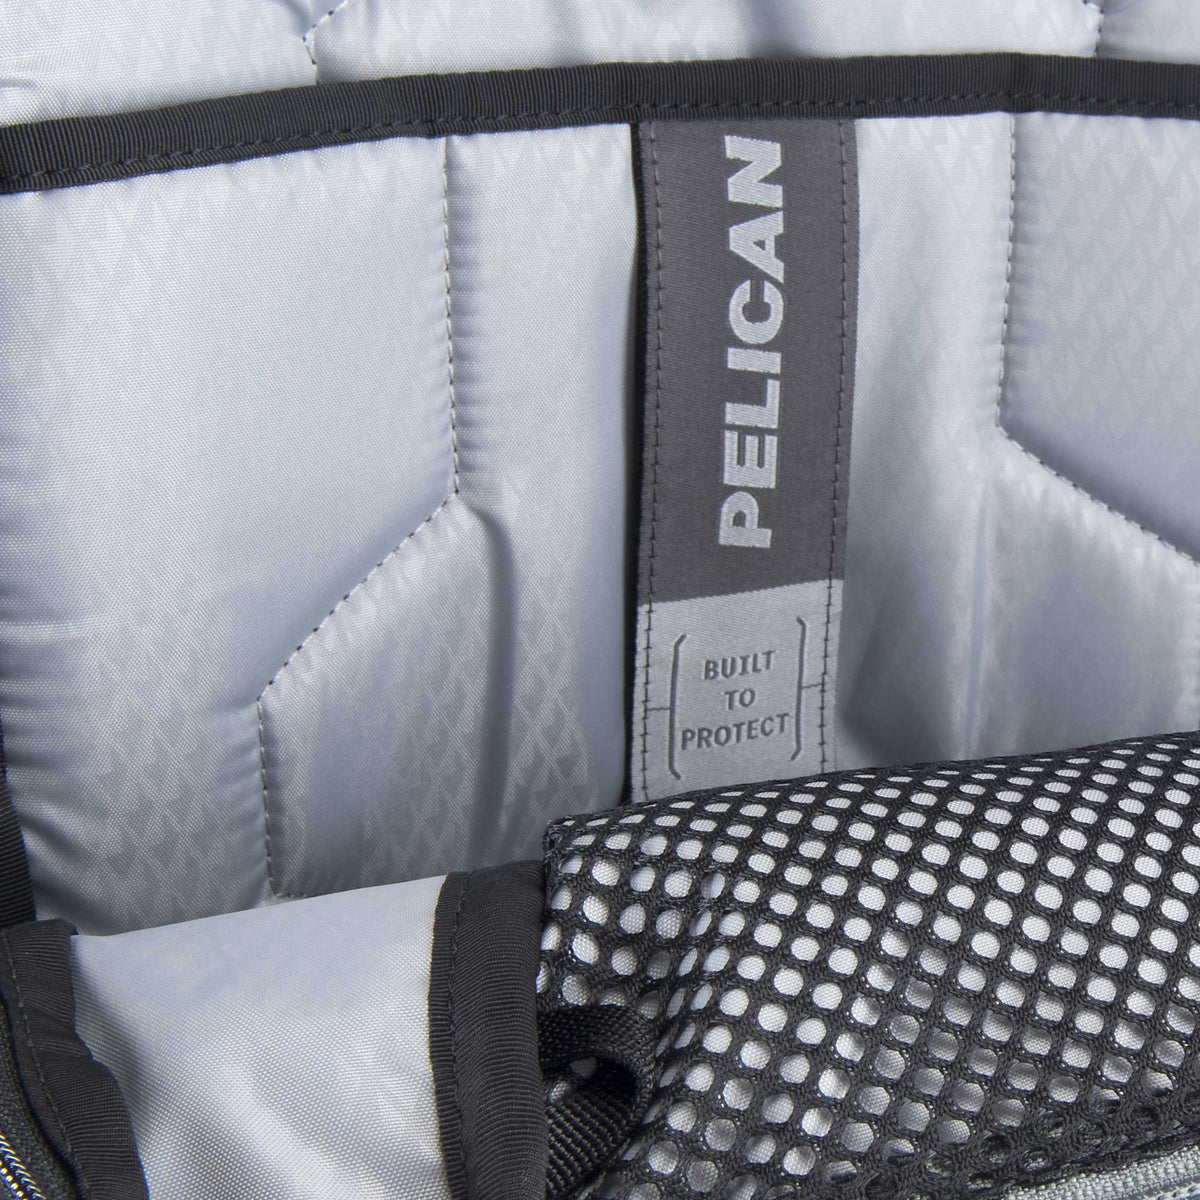 Pelican MPB20 Backpack is built to protect